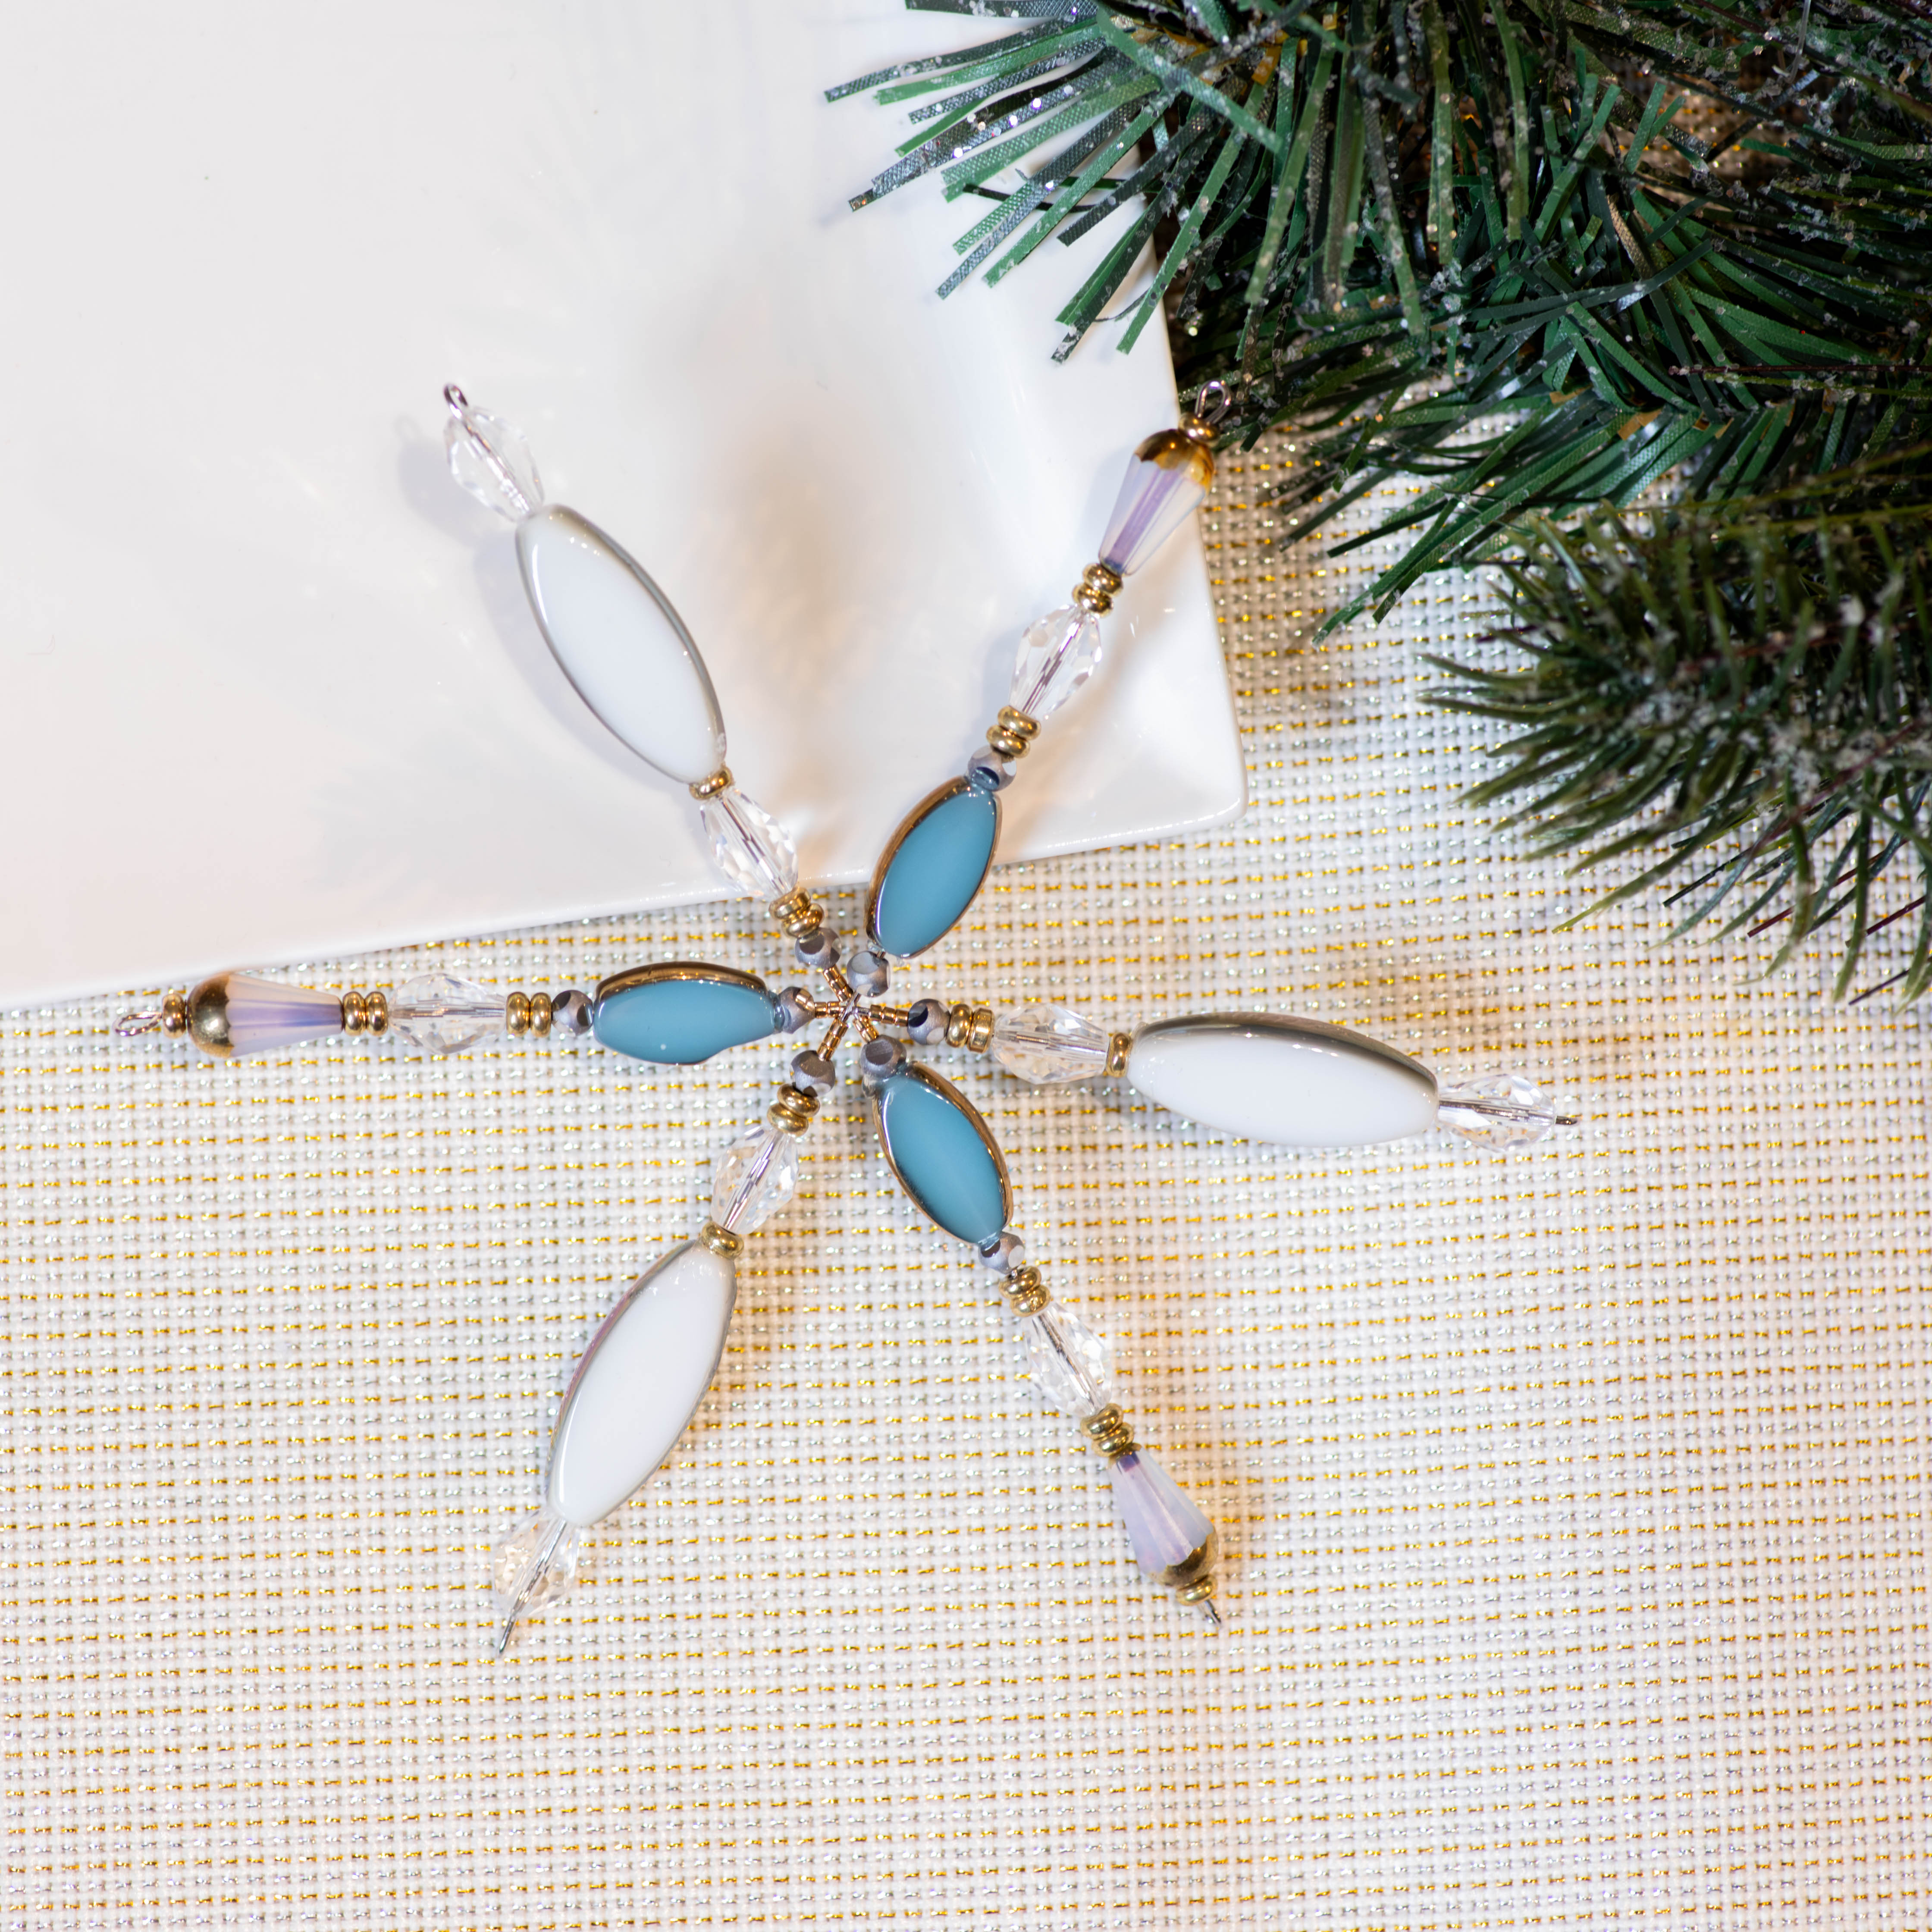 White and Blue Pressed Glass Snowflake Ornament Kit - Limited Edition